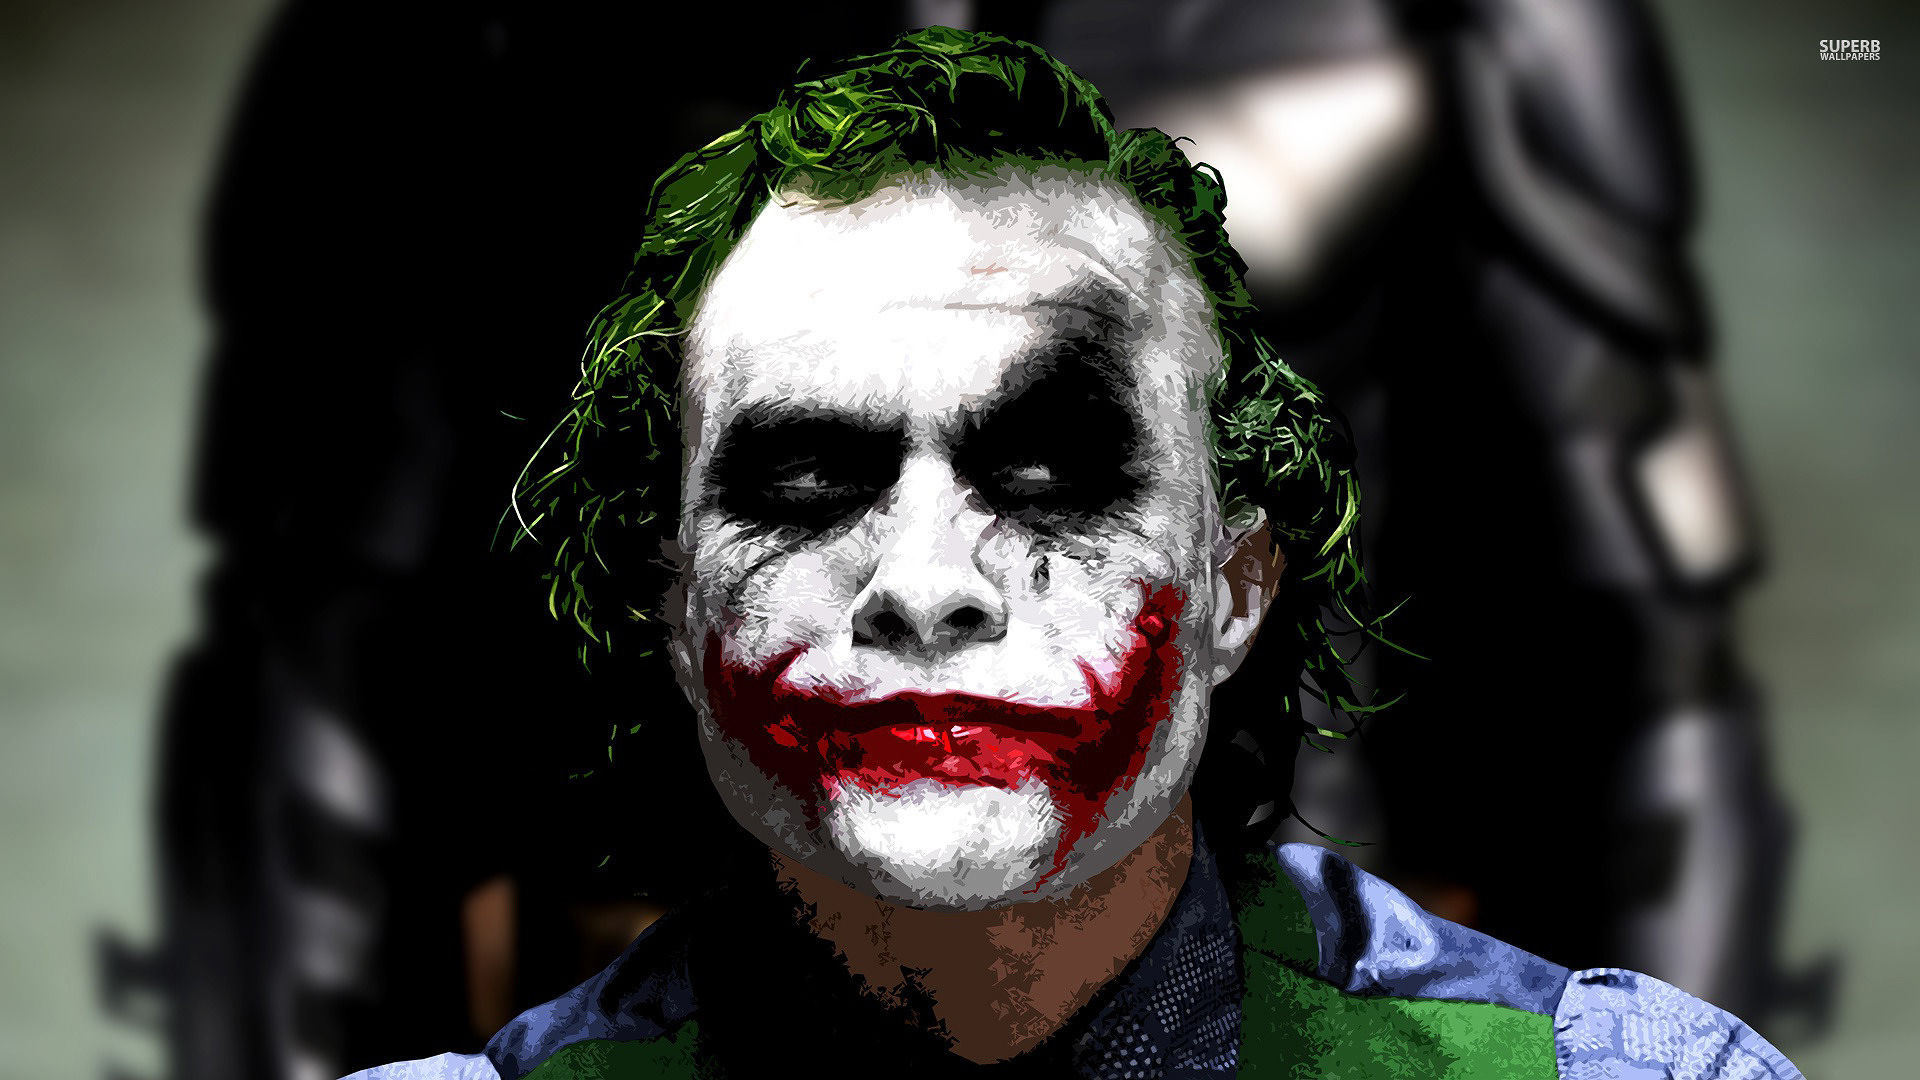 Naurato: Why so serious? Let's put a smile on that face!